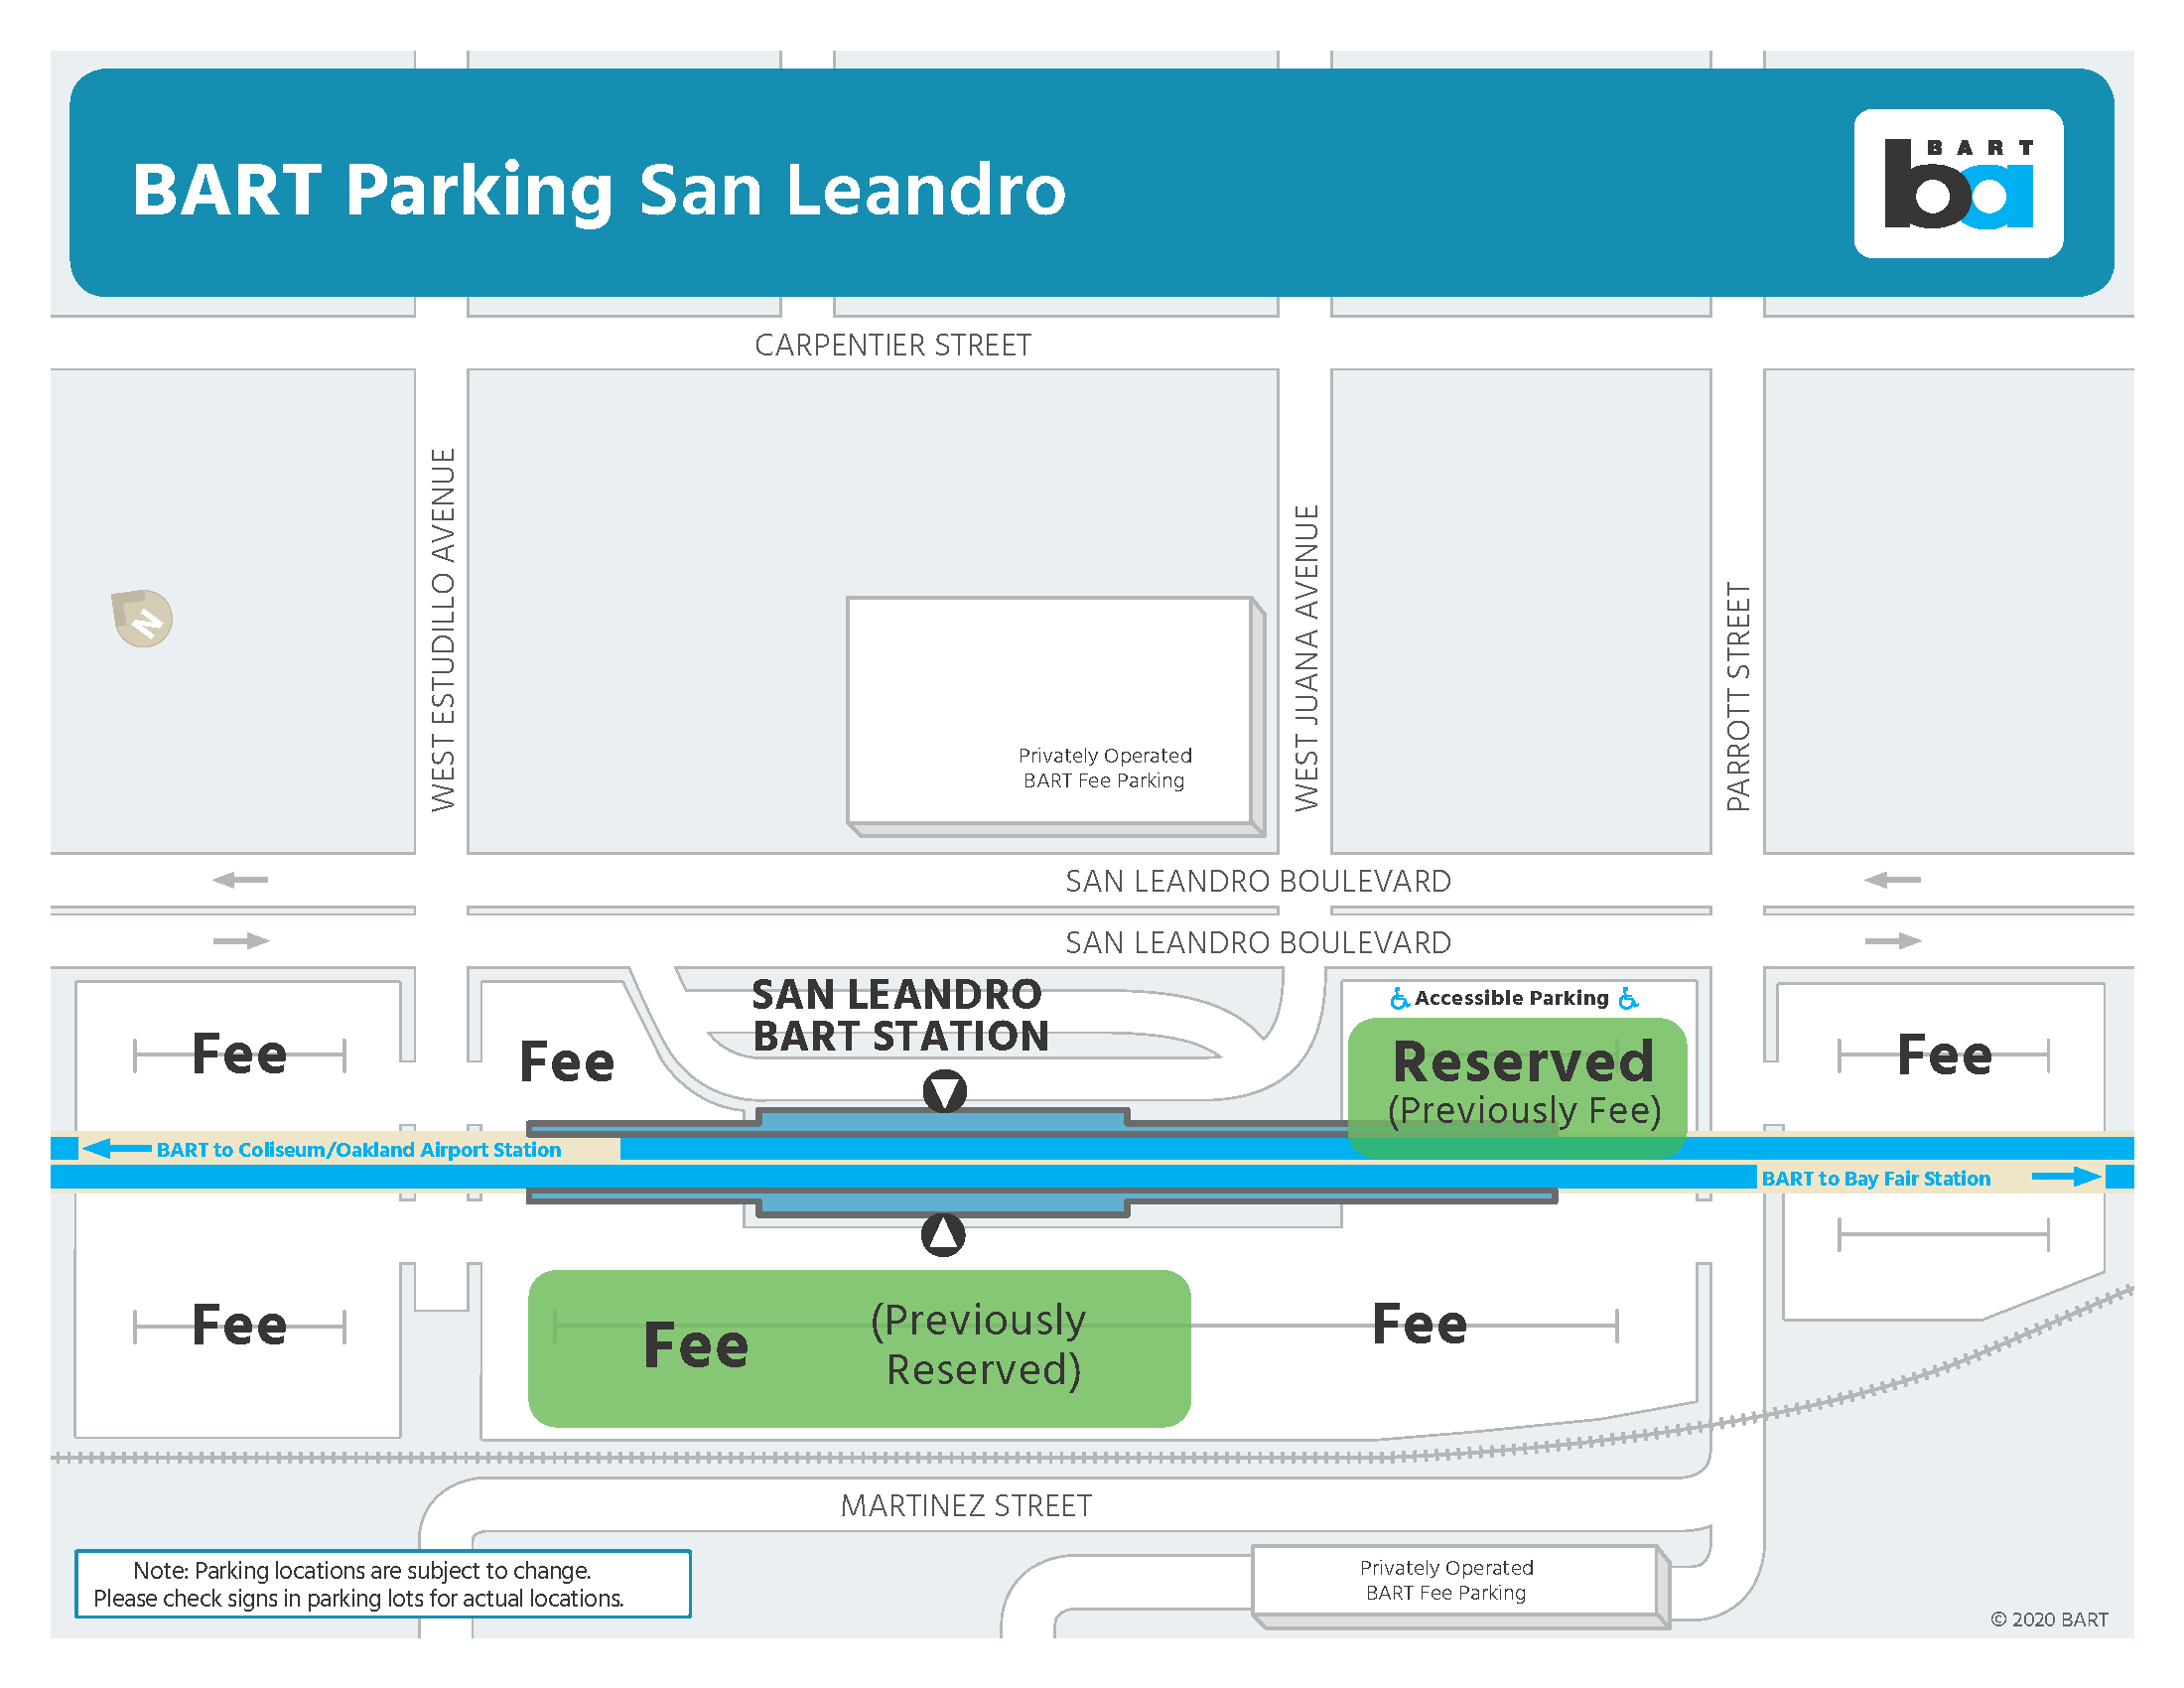 Parking areas at San Leandro Station being reconfigured